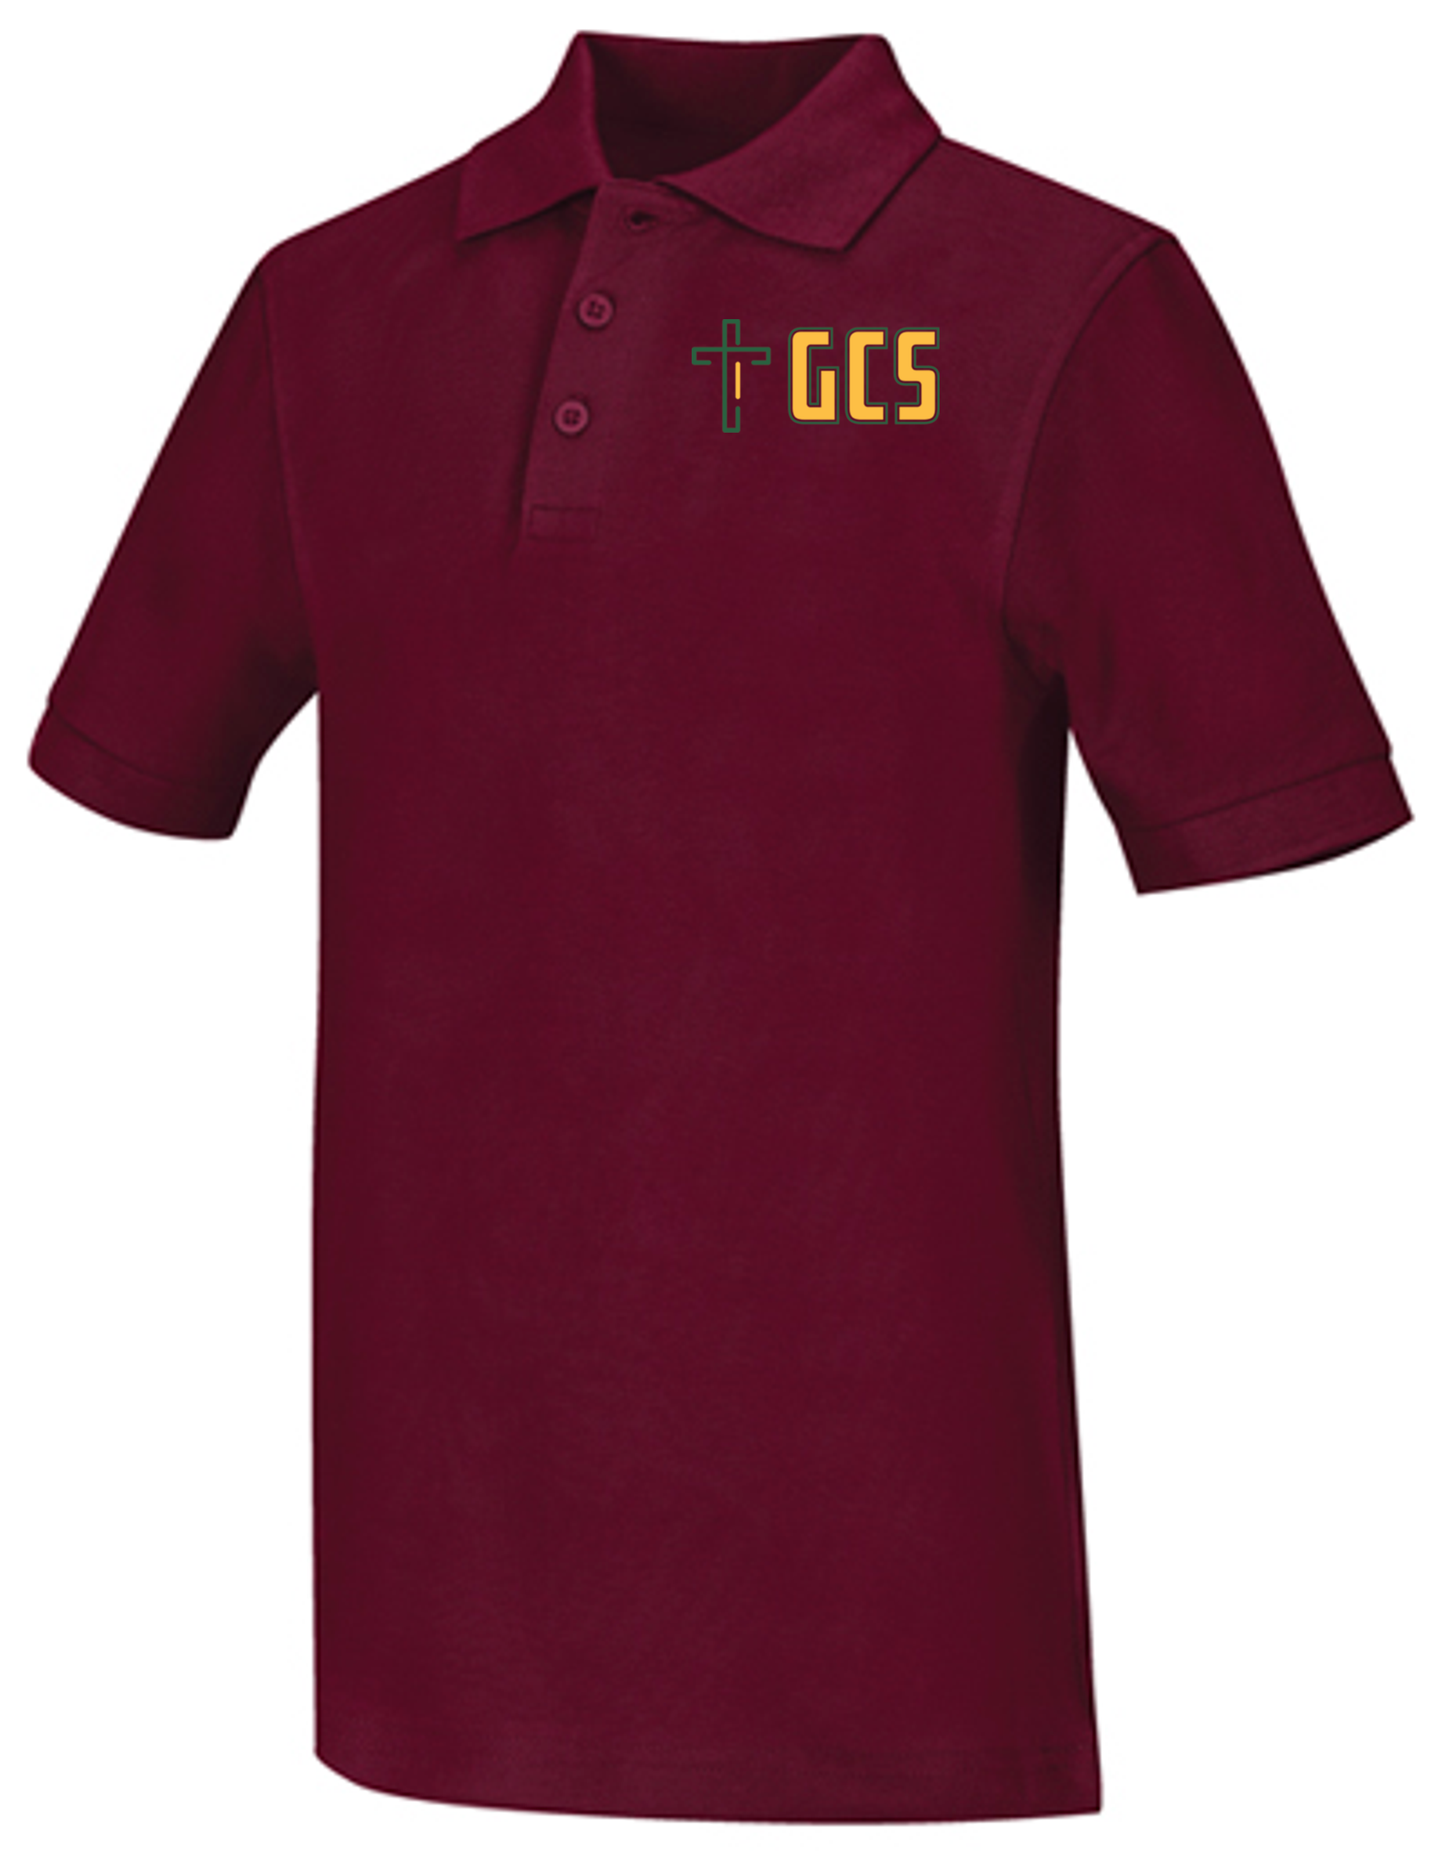 OLD Fit Youth Unisex Short Sleeve Pique Polo